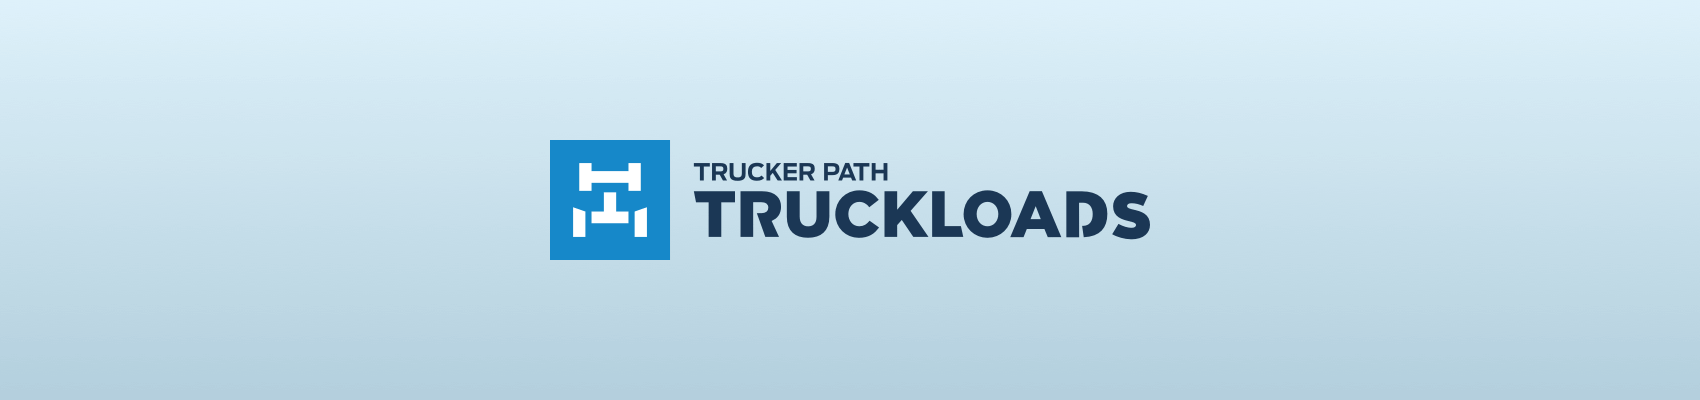 Post your loads to Trucker Path's Truckloads